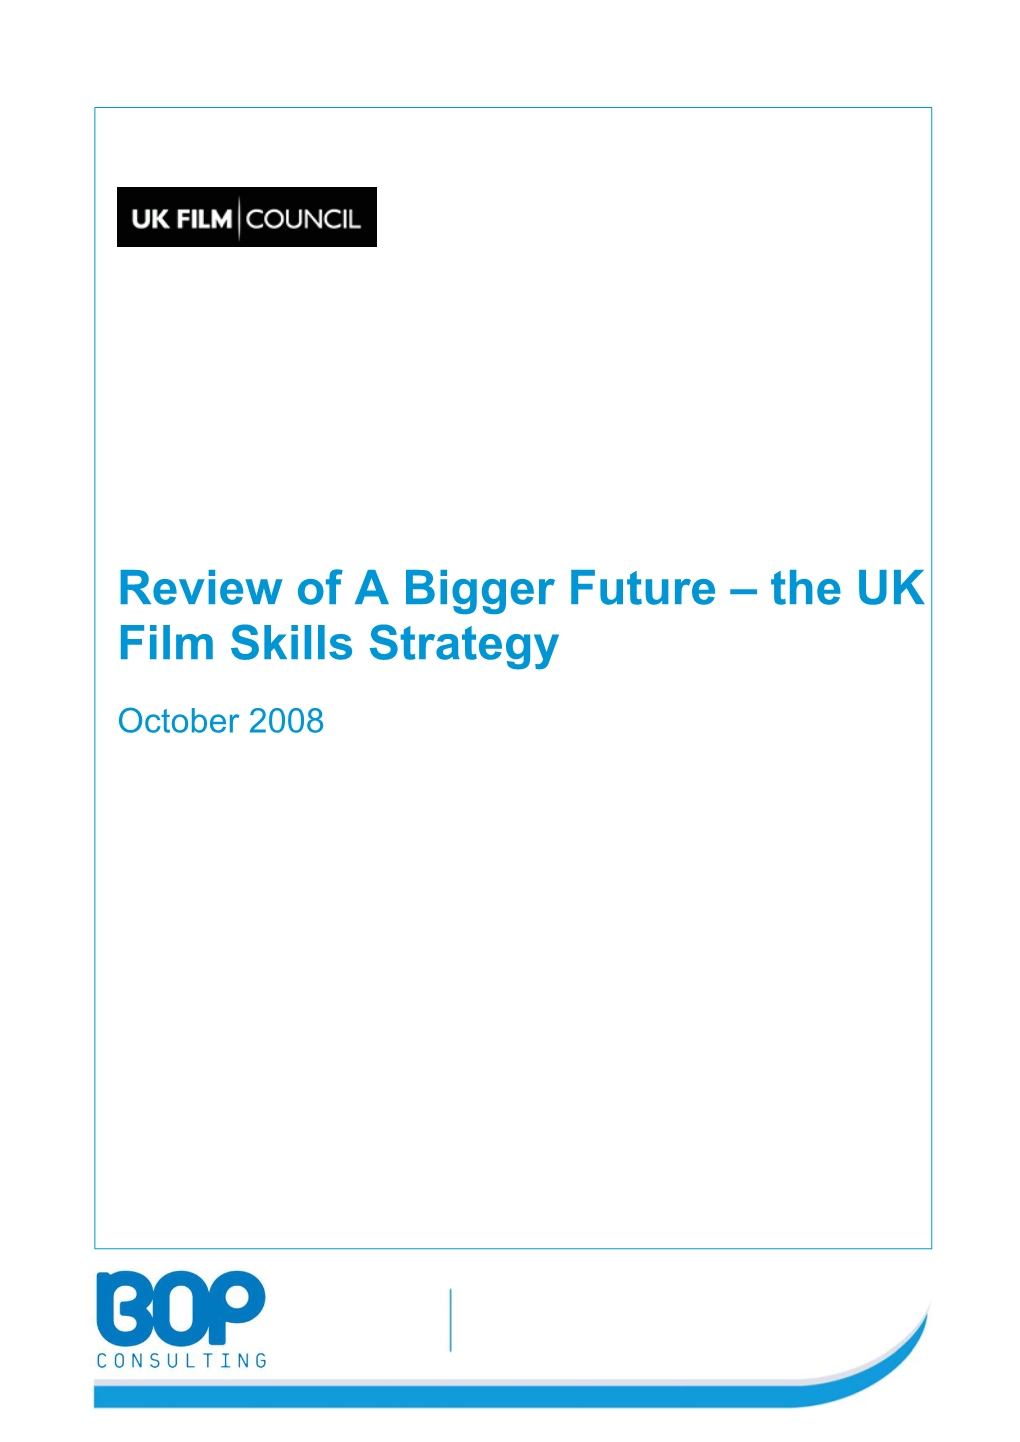 Review of a Bigger Future – the UK Film Skills Strategy